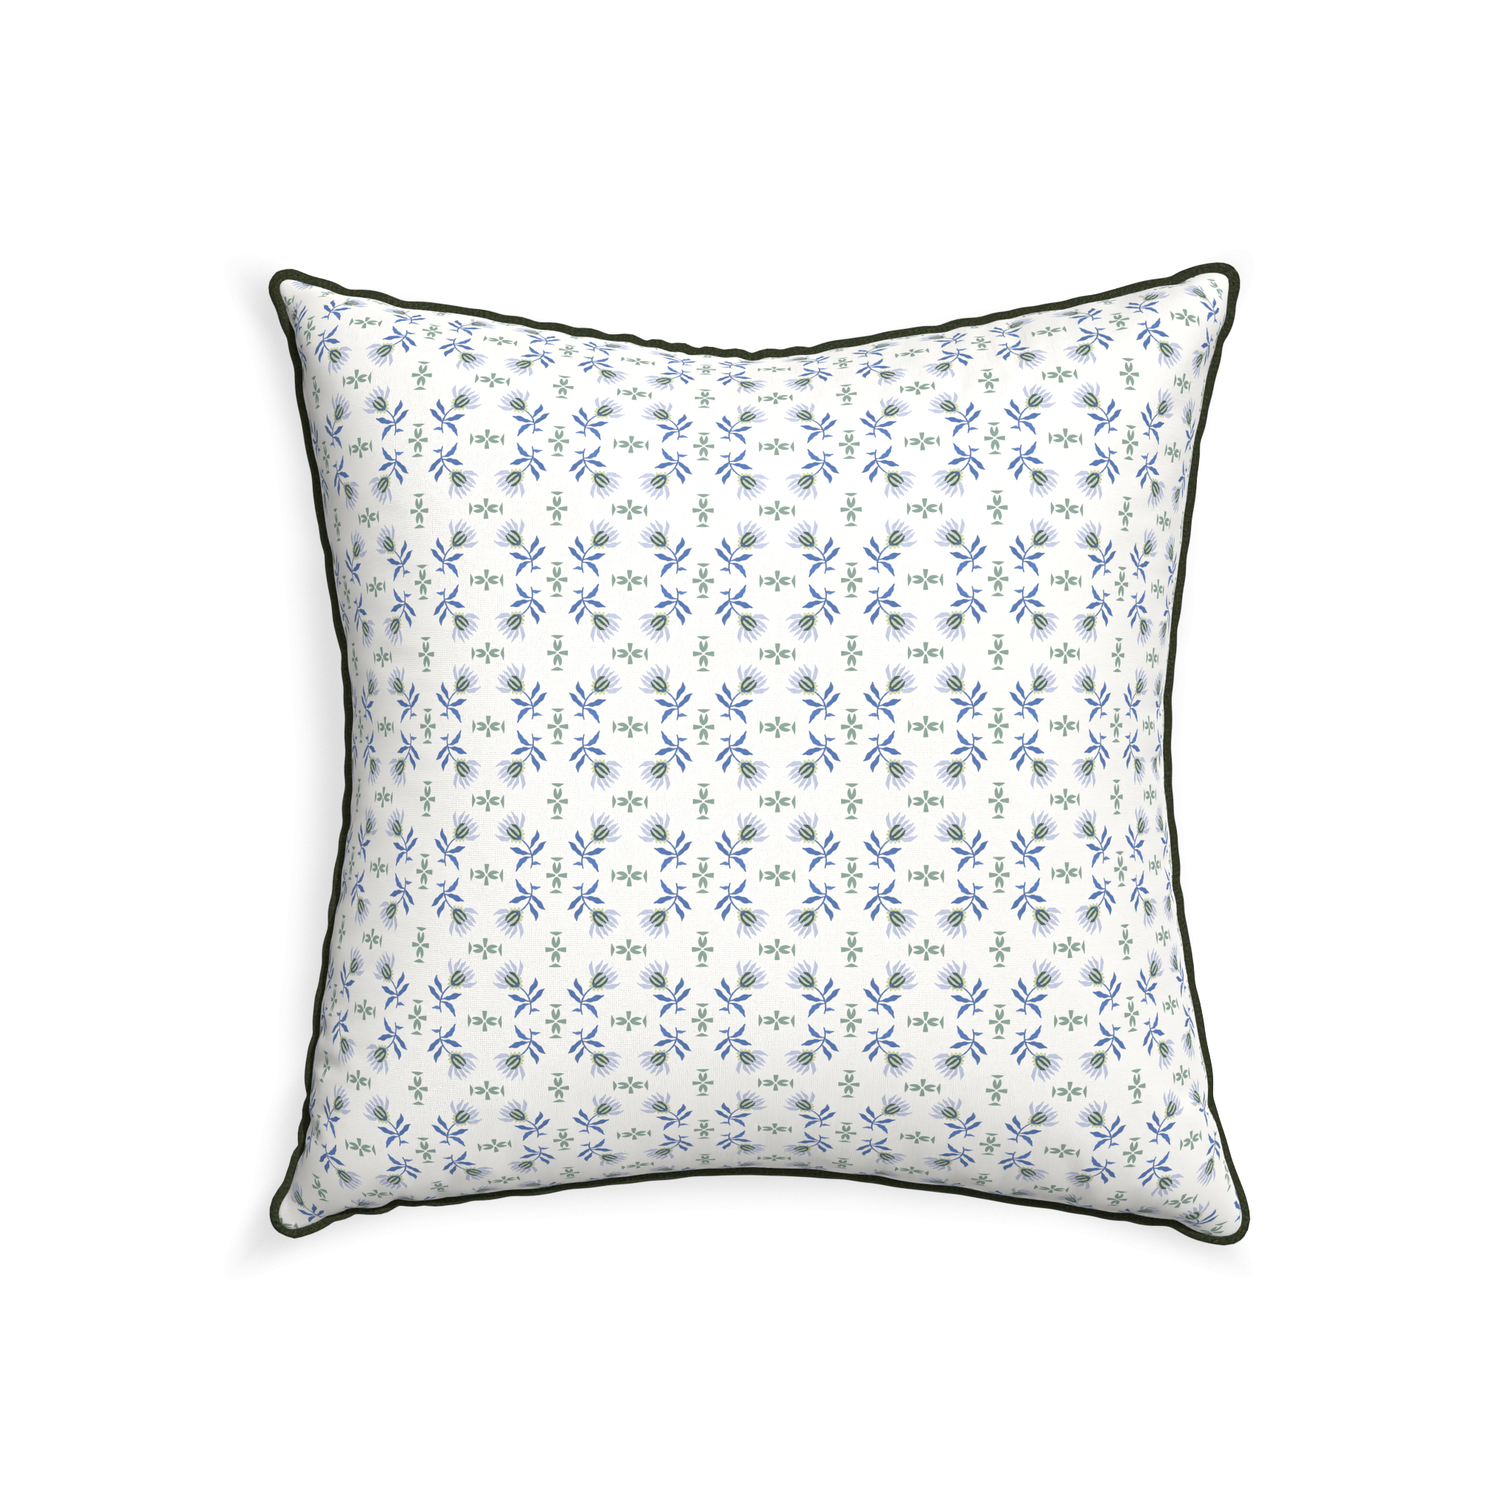 22-square lee custom blue & green floralpillow with f piping on white background